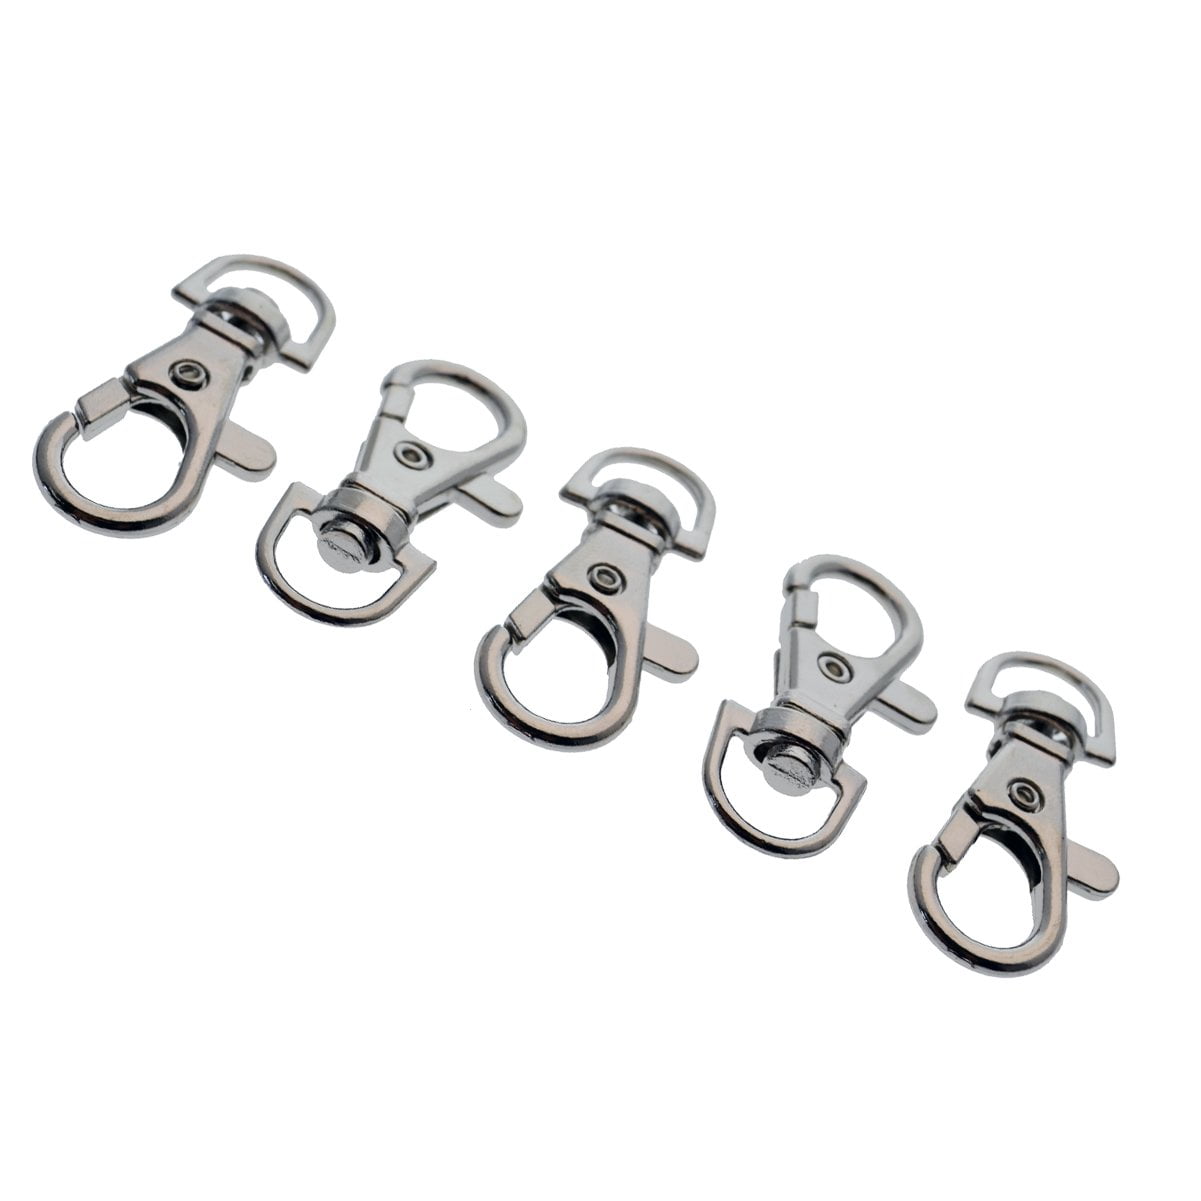 JWBIZ 15 Pcs D Ring Swivel Lobster Claw Clasp Gold, 1 inch Push Gate Snap Hooks Trigger Clips